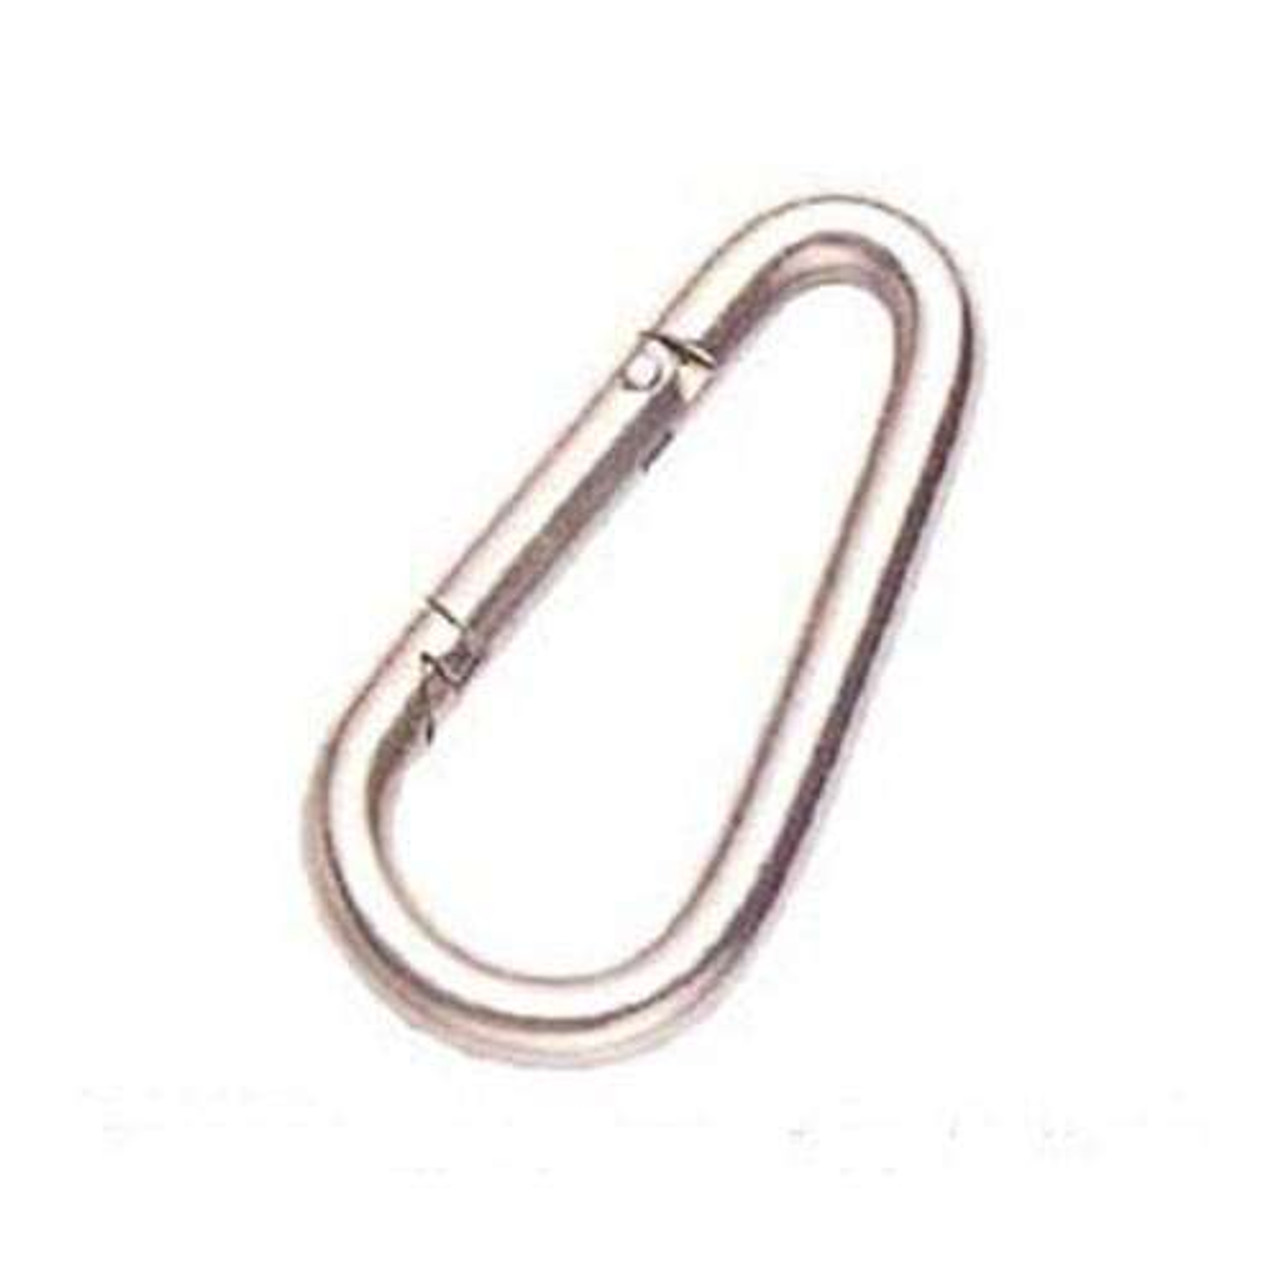 3/8 ZINC PLATED SPRING SNAP HOOK - WLL 400 LBS - Bairstow Lifting Products